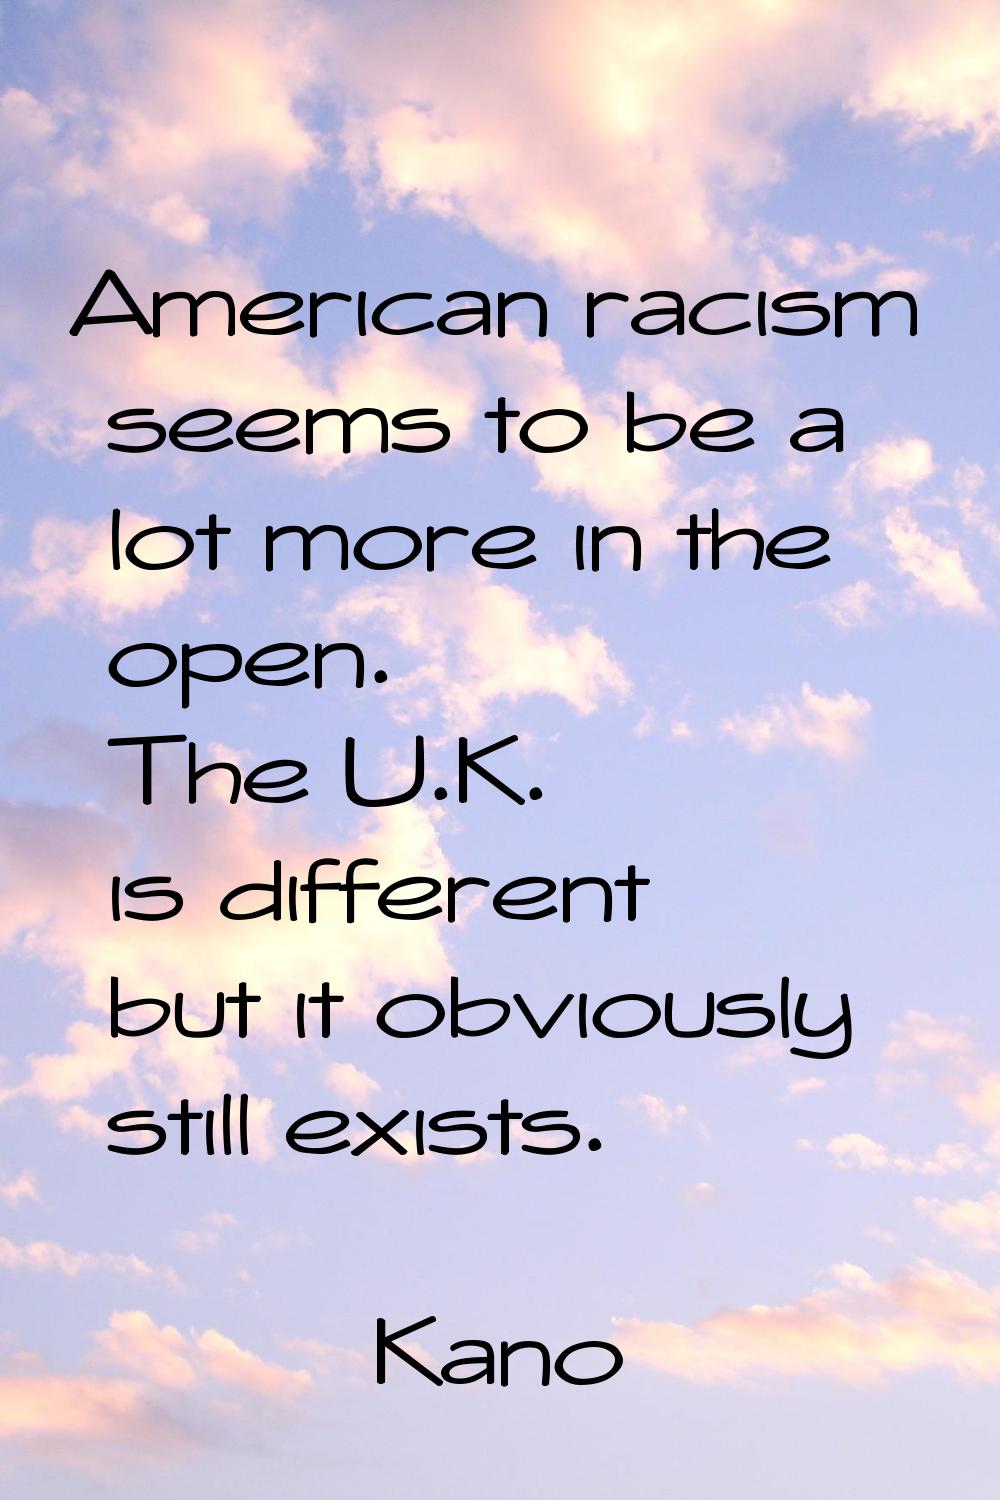 American racism seems to be a lot more in the open. The U.K. is different but it obviously still ex